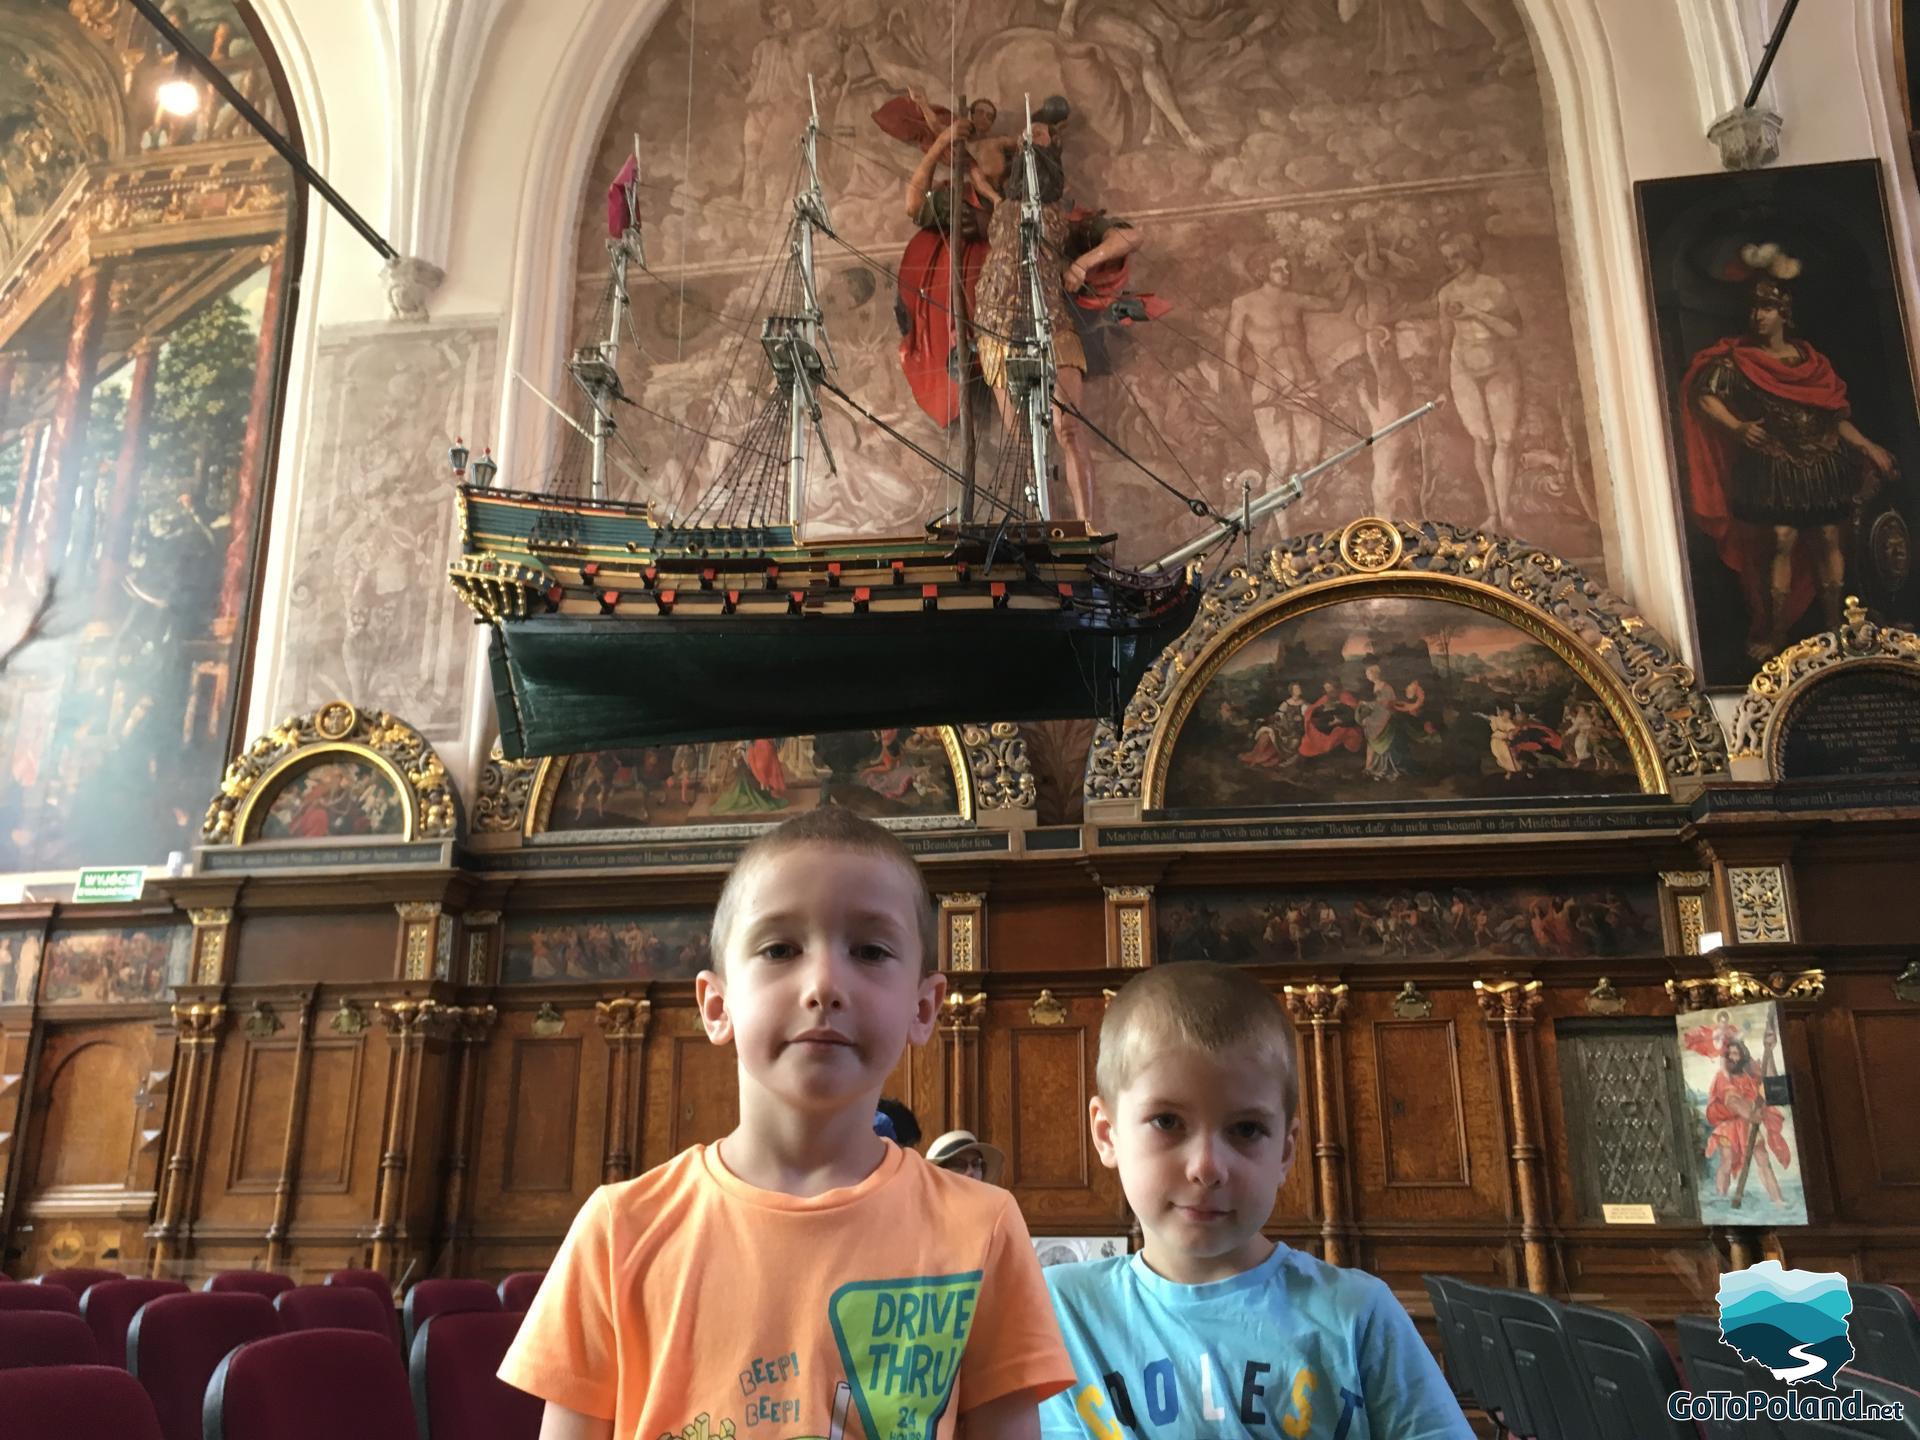 a two boys are in a hall, a model of a green ship hangs from the ceiling, walls are painted 